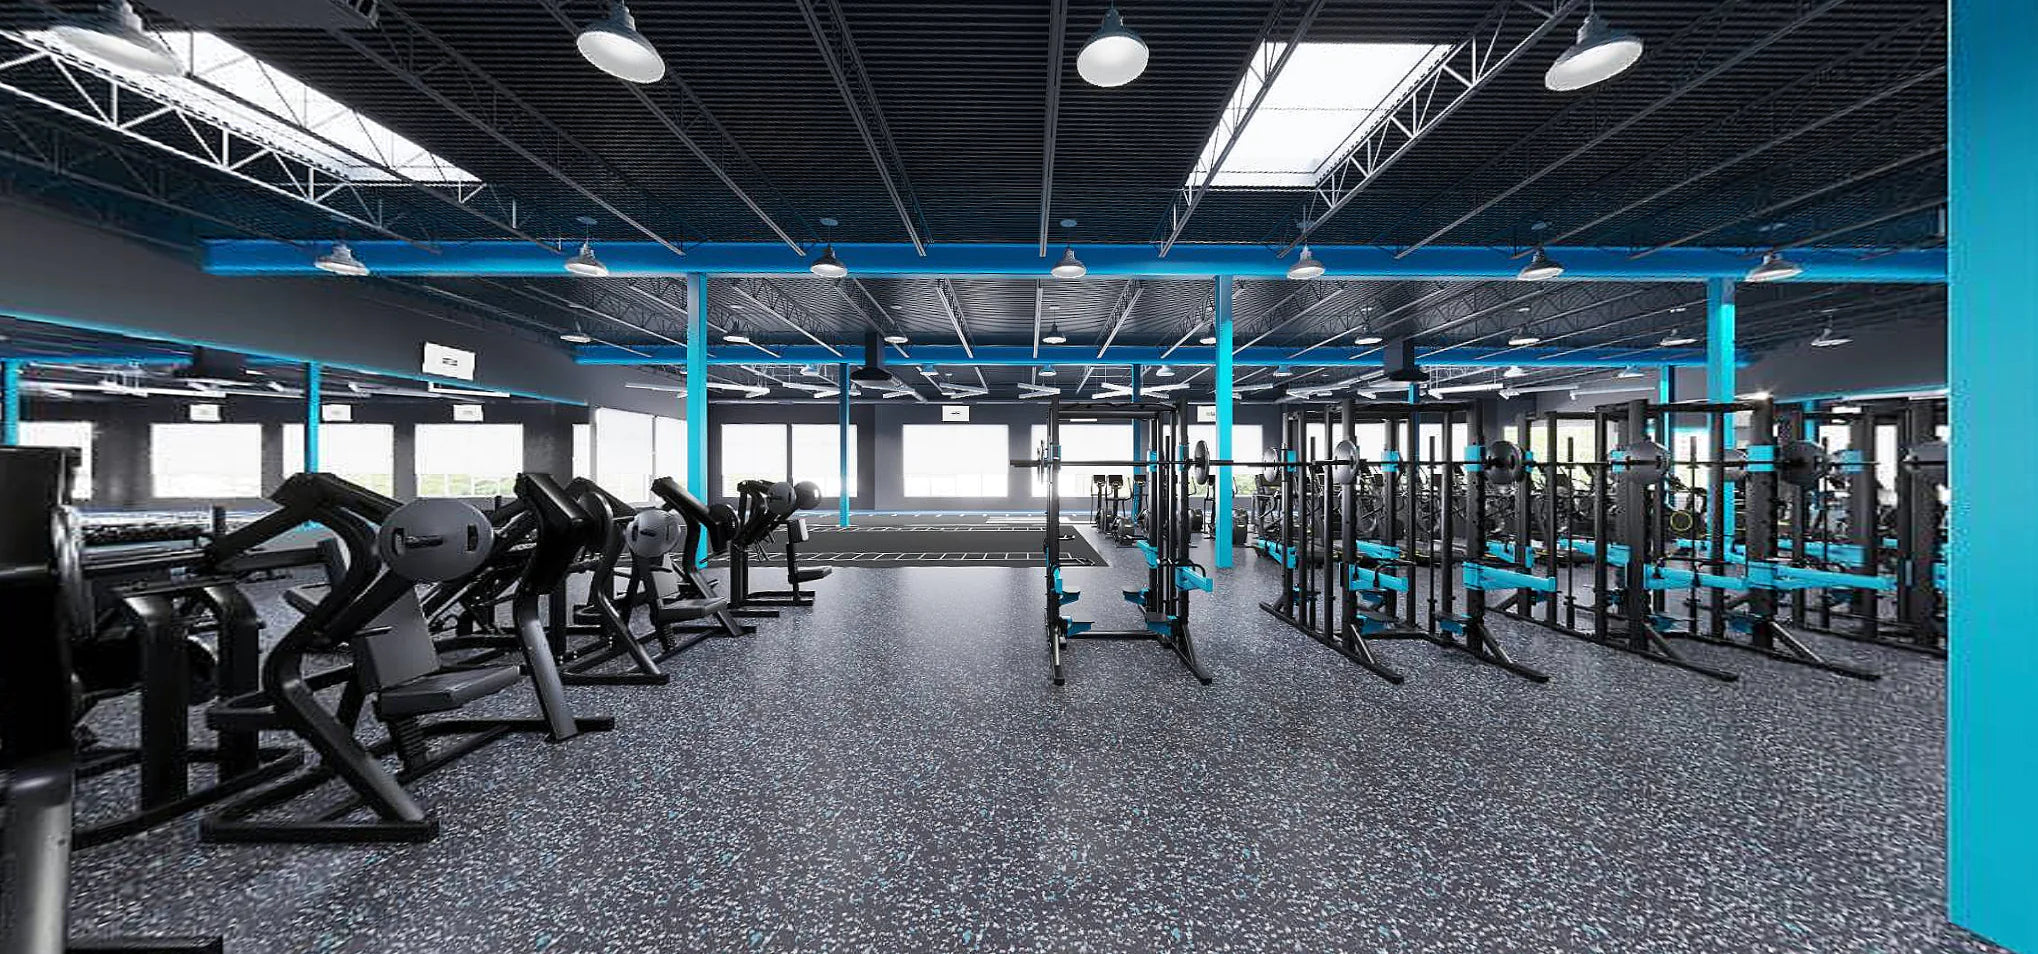 Rothesay Gym Membership  Forfitness and Athletics Performance Centre